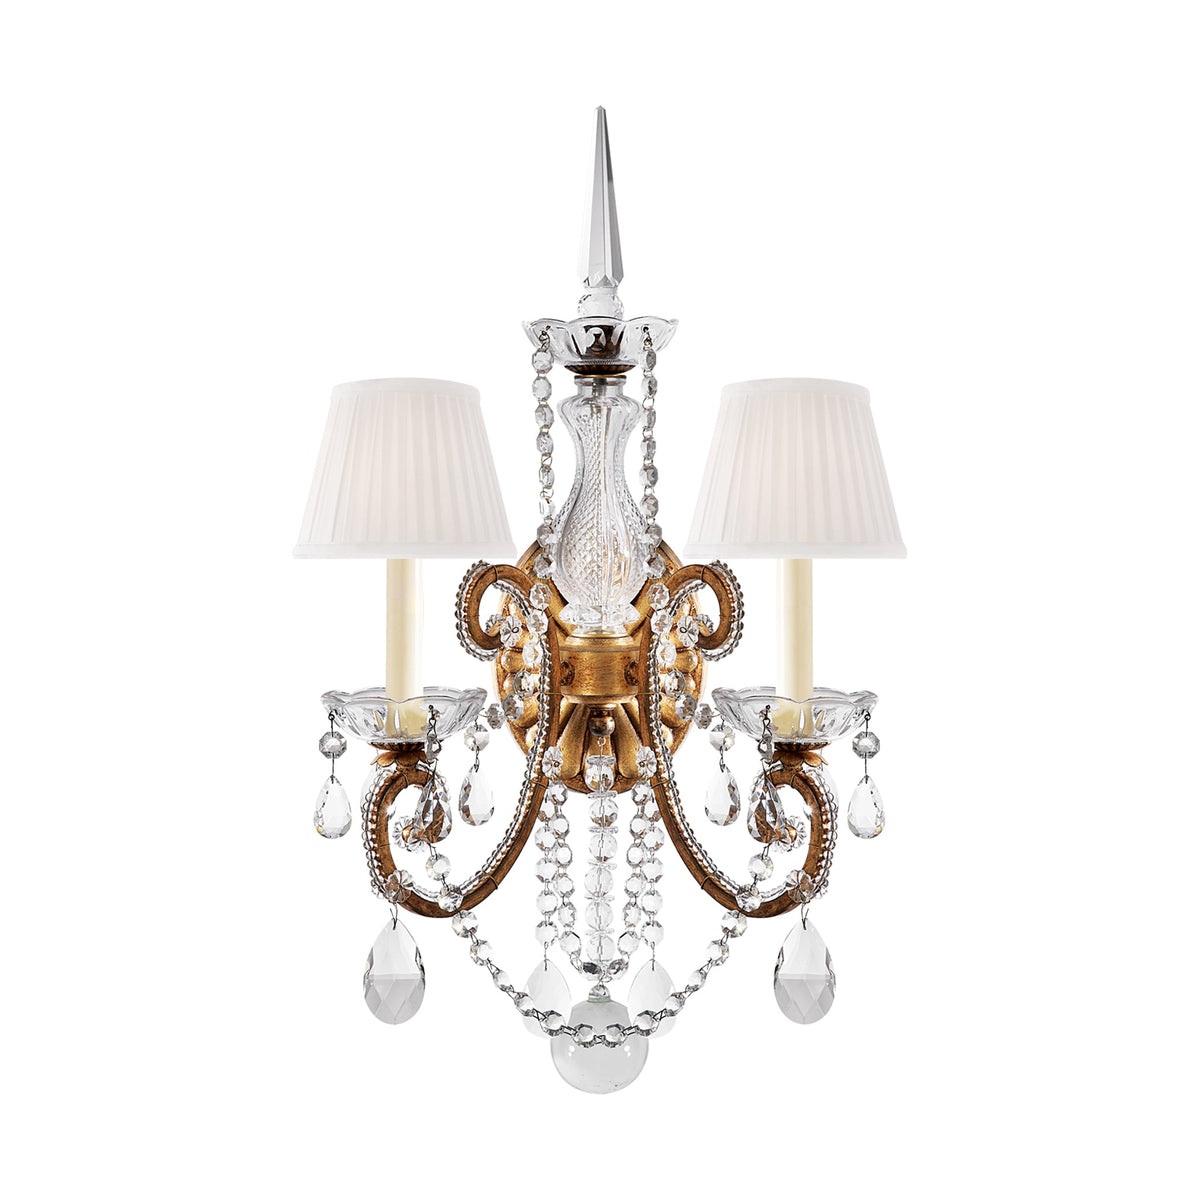 ADRIANNA DOUBLE SCONCE IN GOLDED IRON AND CRYSTAL WITH SILK SHADES